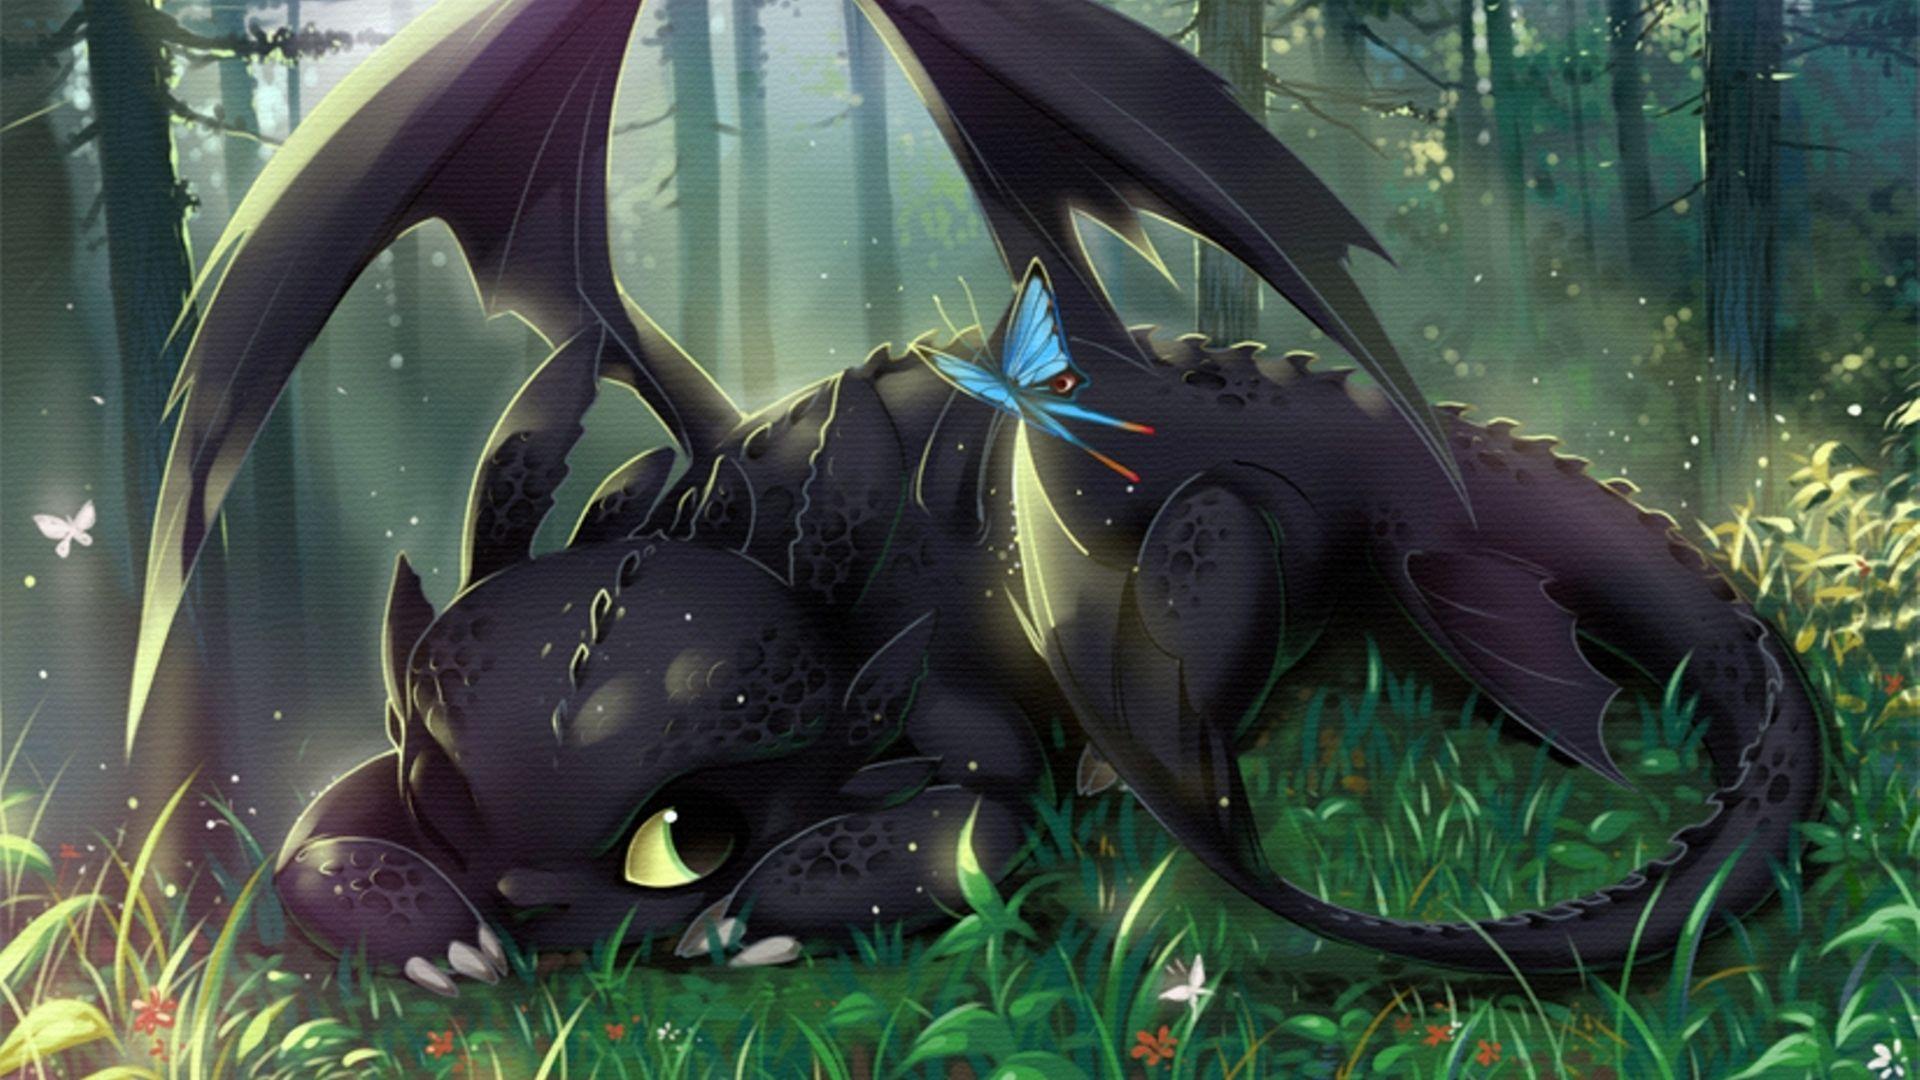 Toothless The Dragon Wallpaper (46 Wallpaper)